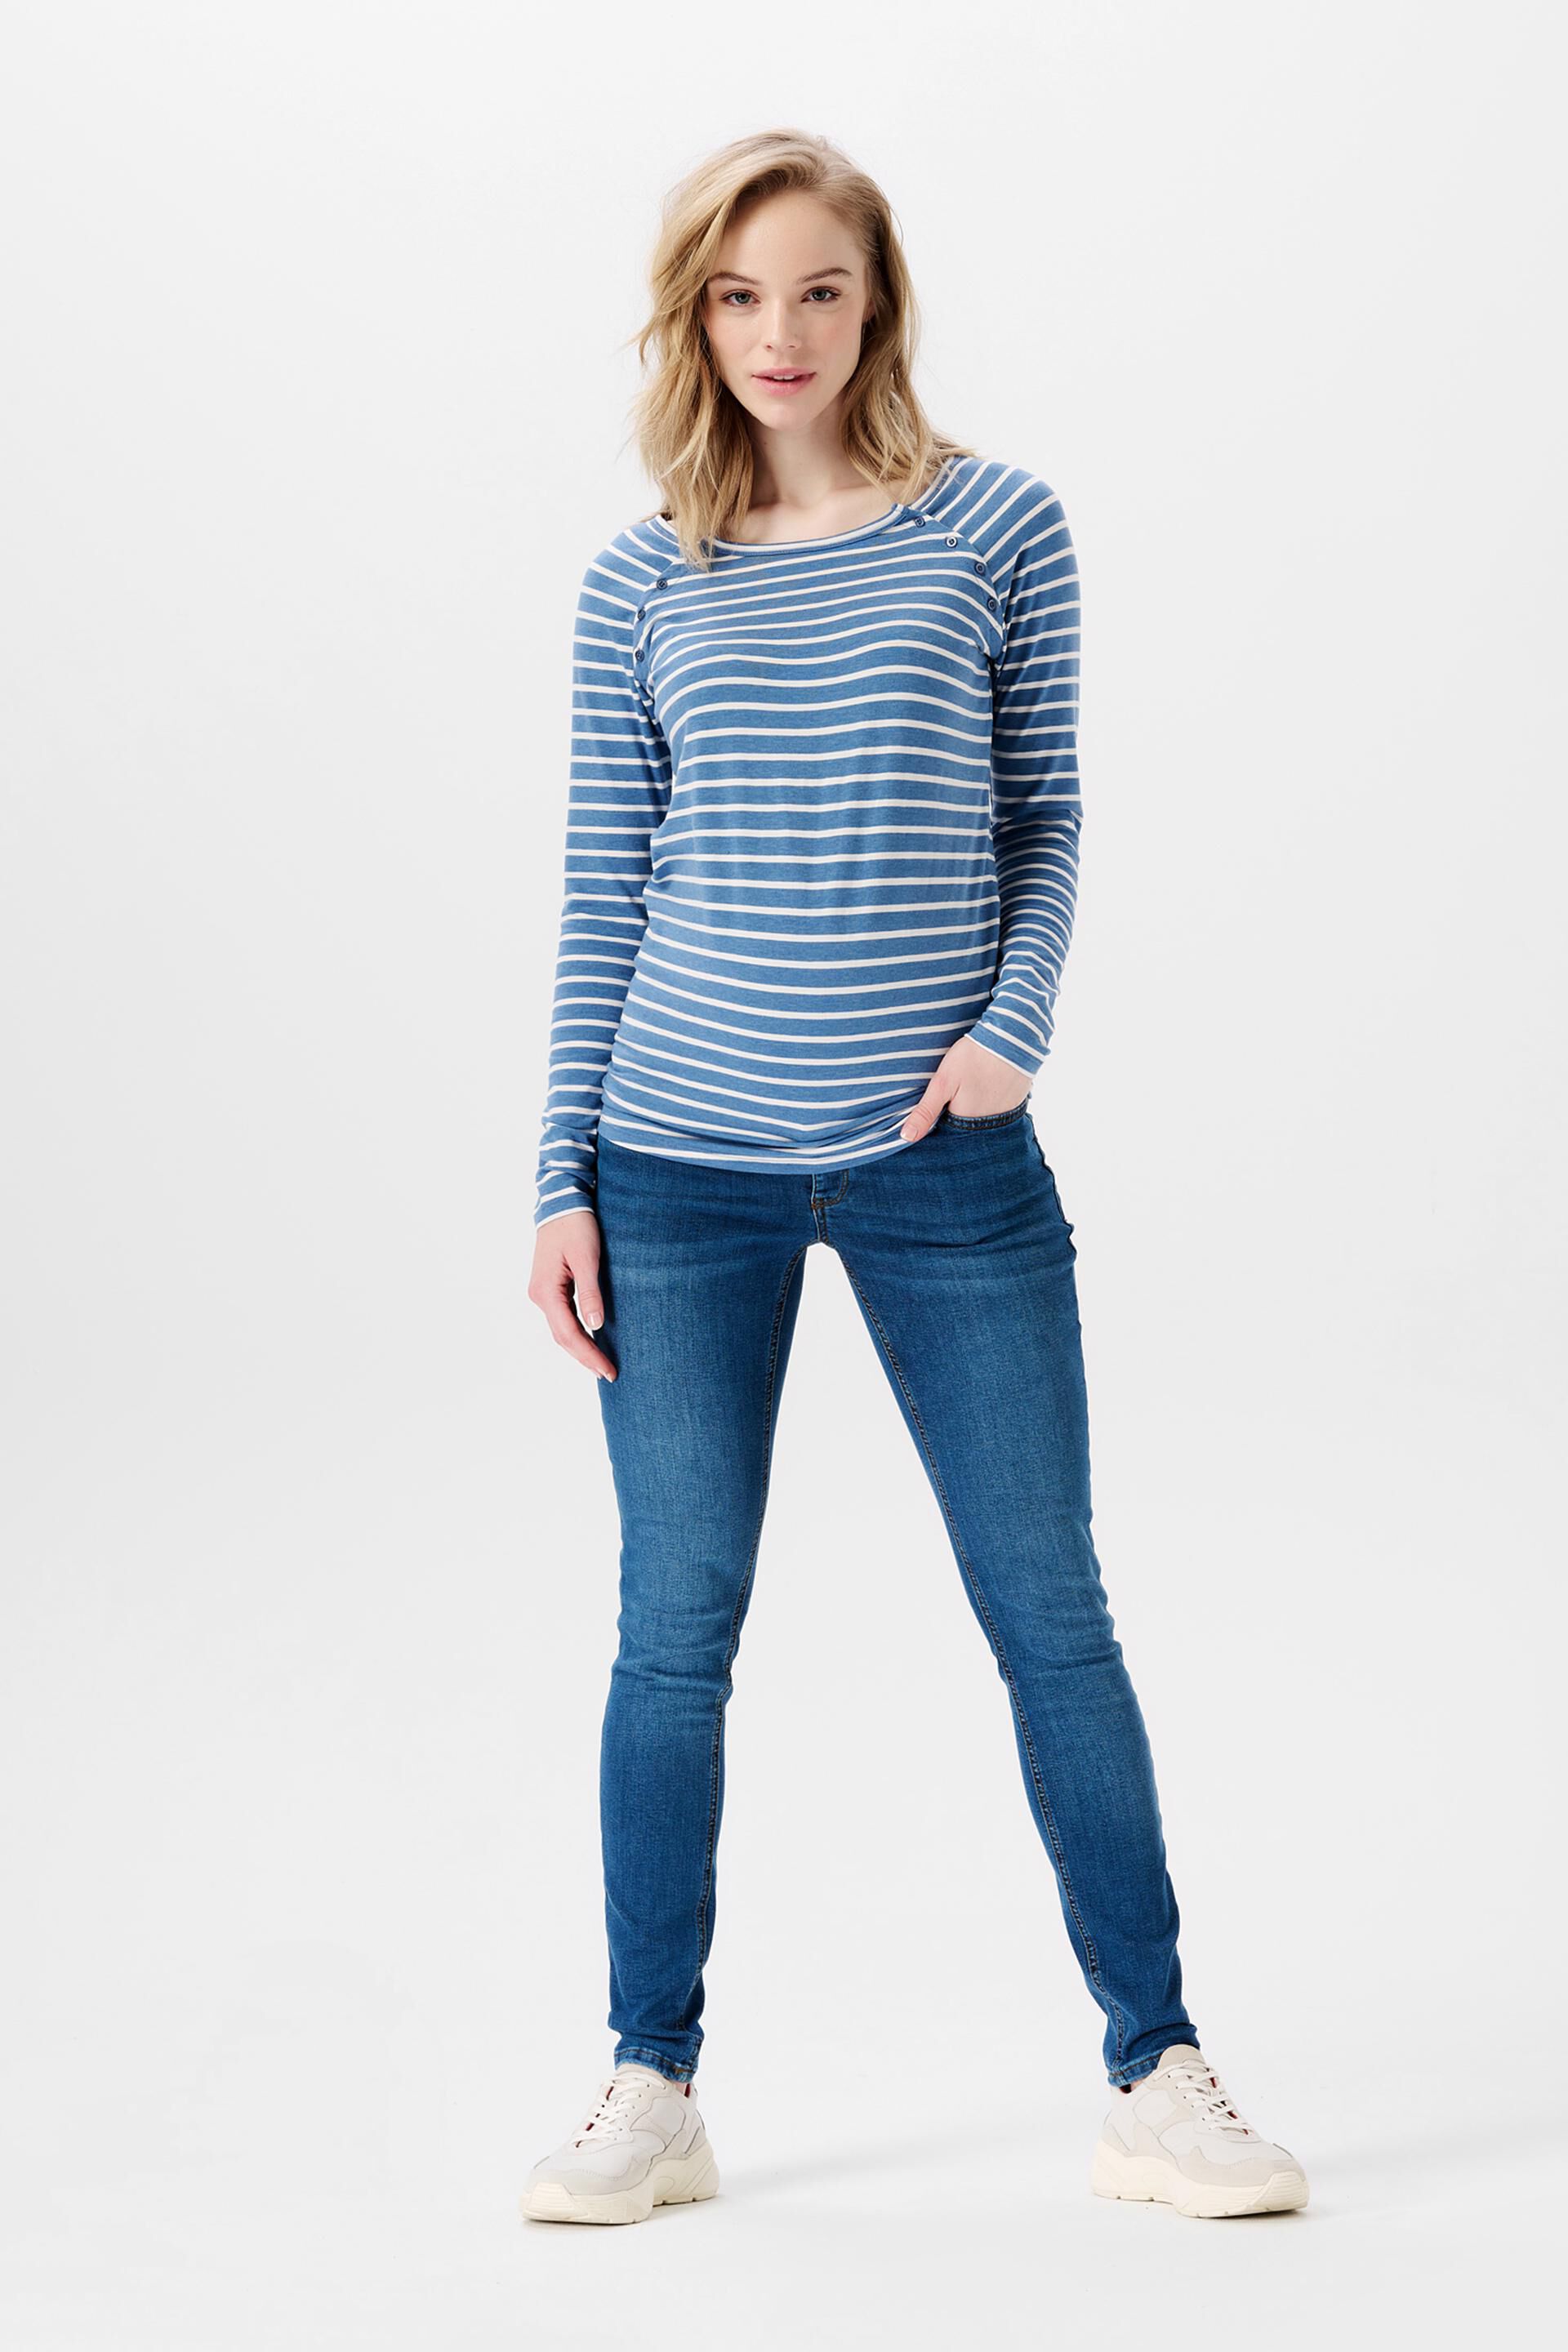 Esprit Skinny waistband with over-the-bump fit jeans